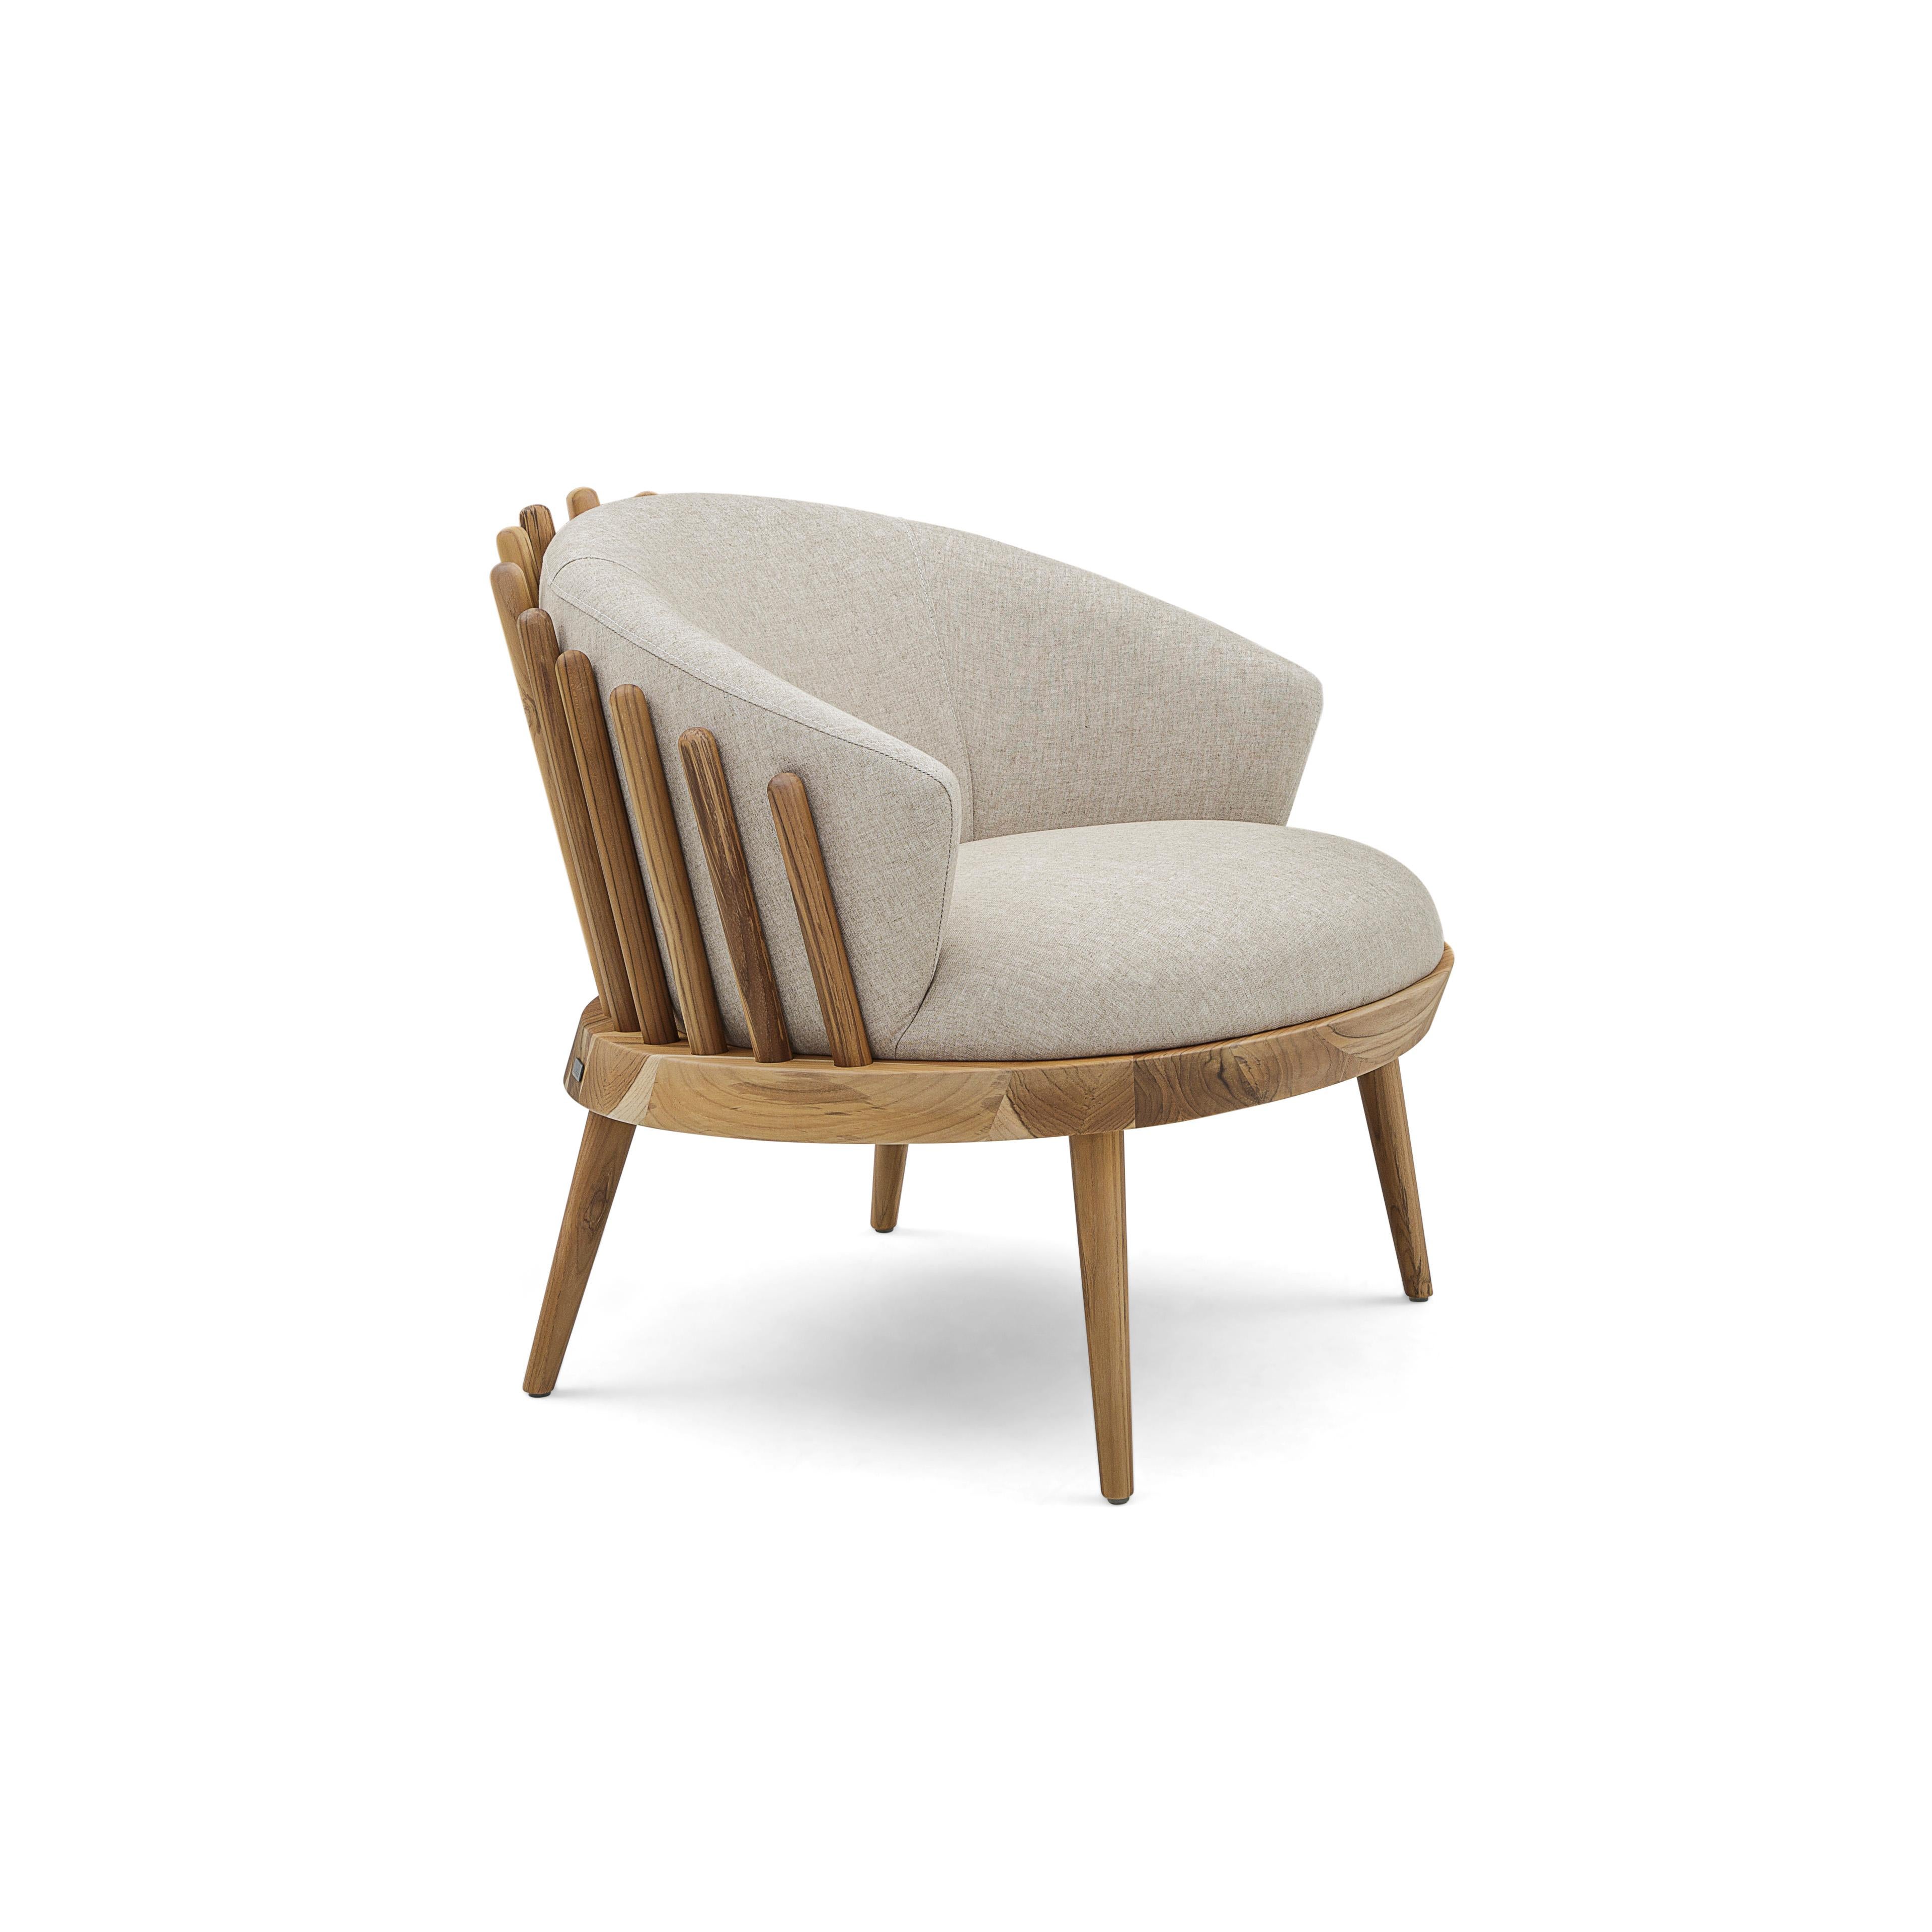 The Uultis design team has created this beautiful Fane armchair, upholstered with beautiful and soft ivory fabric, feature with a teak wood finish. This beautiful creation will provide a perfect comfortable space with its cushion seat and back, to